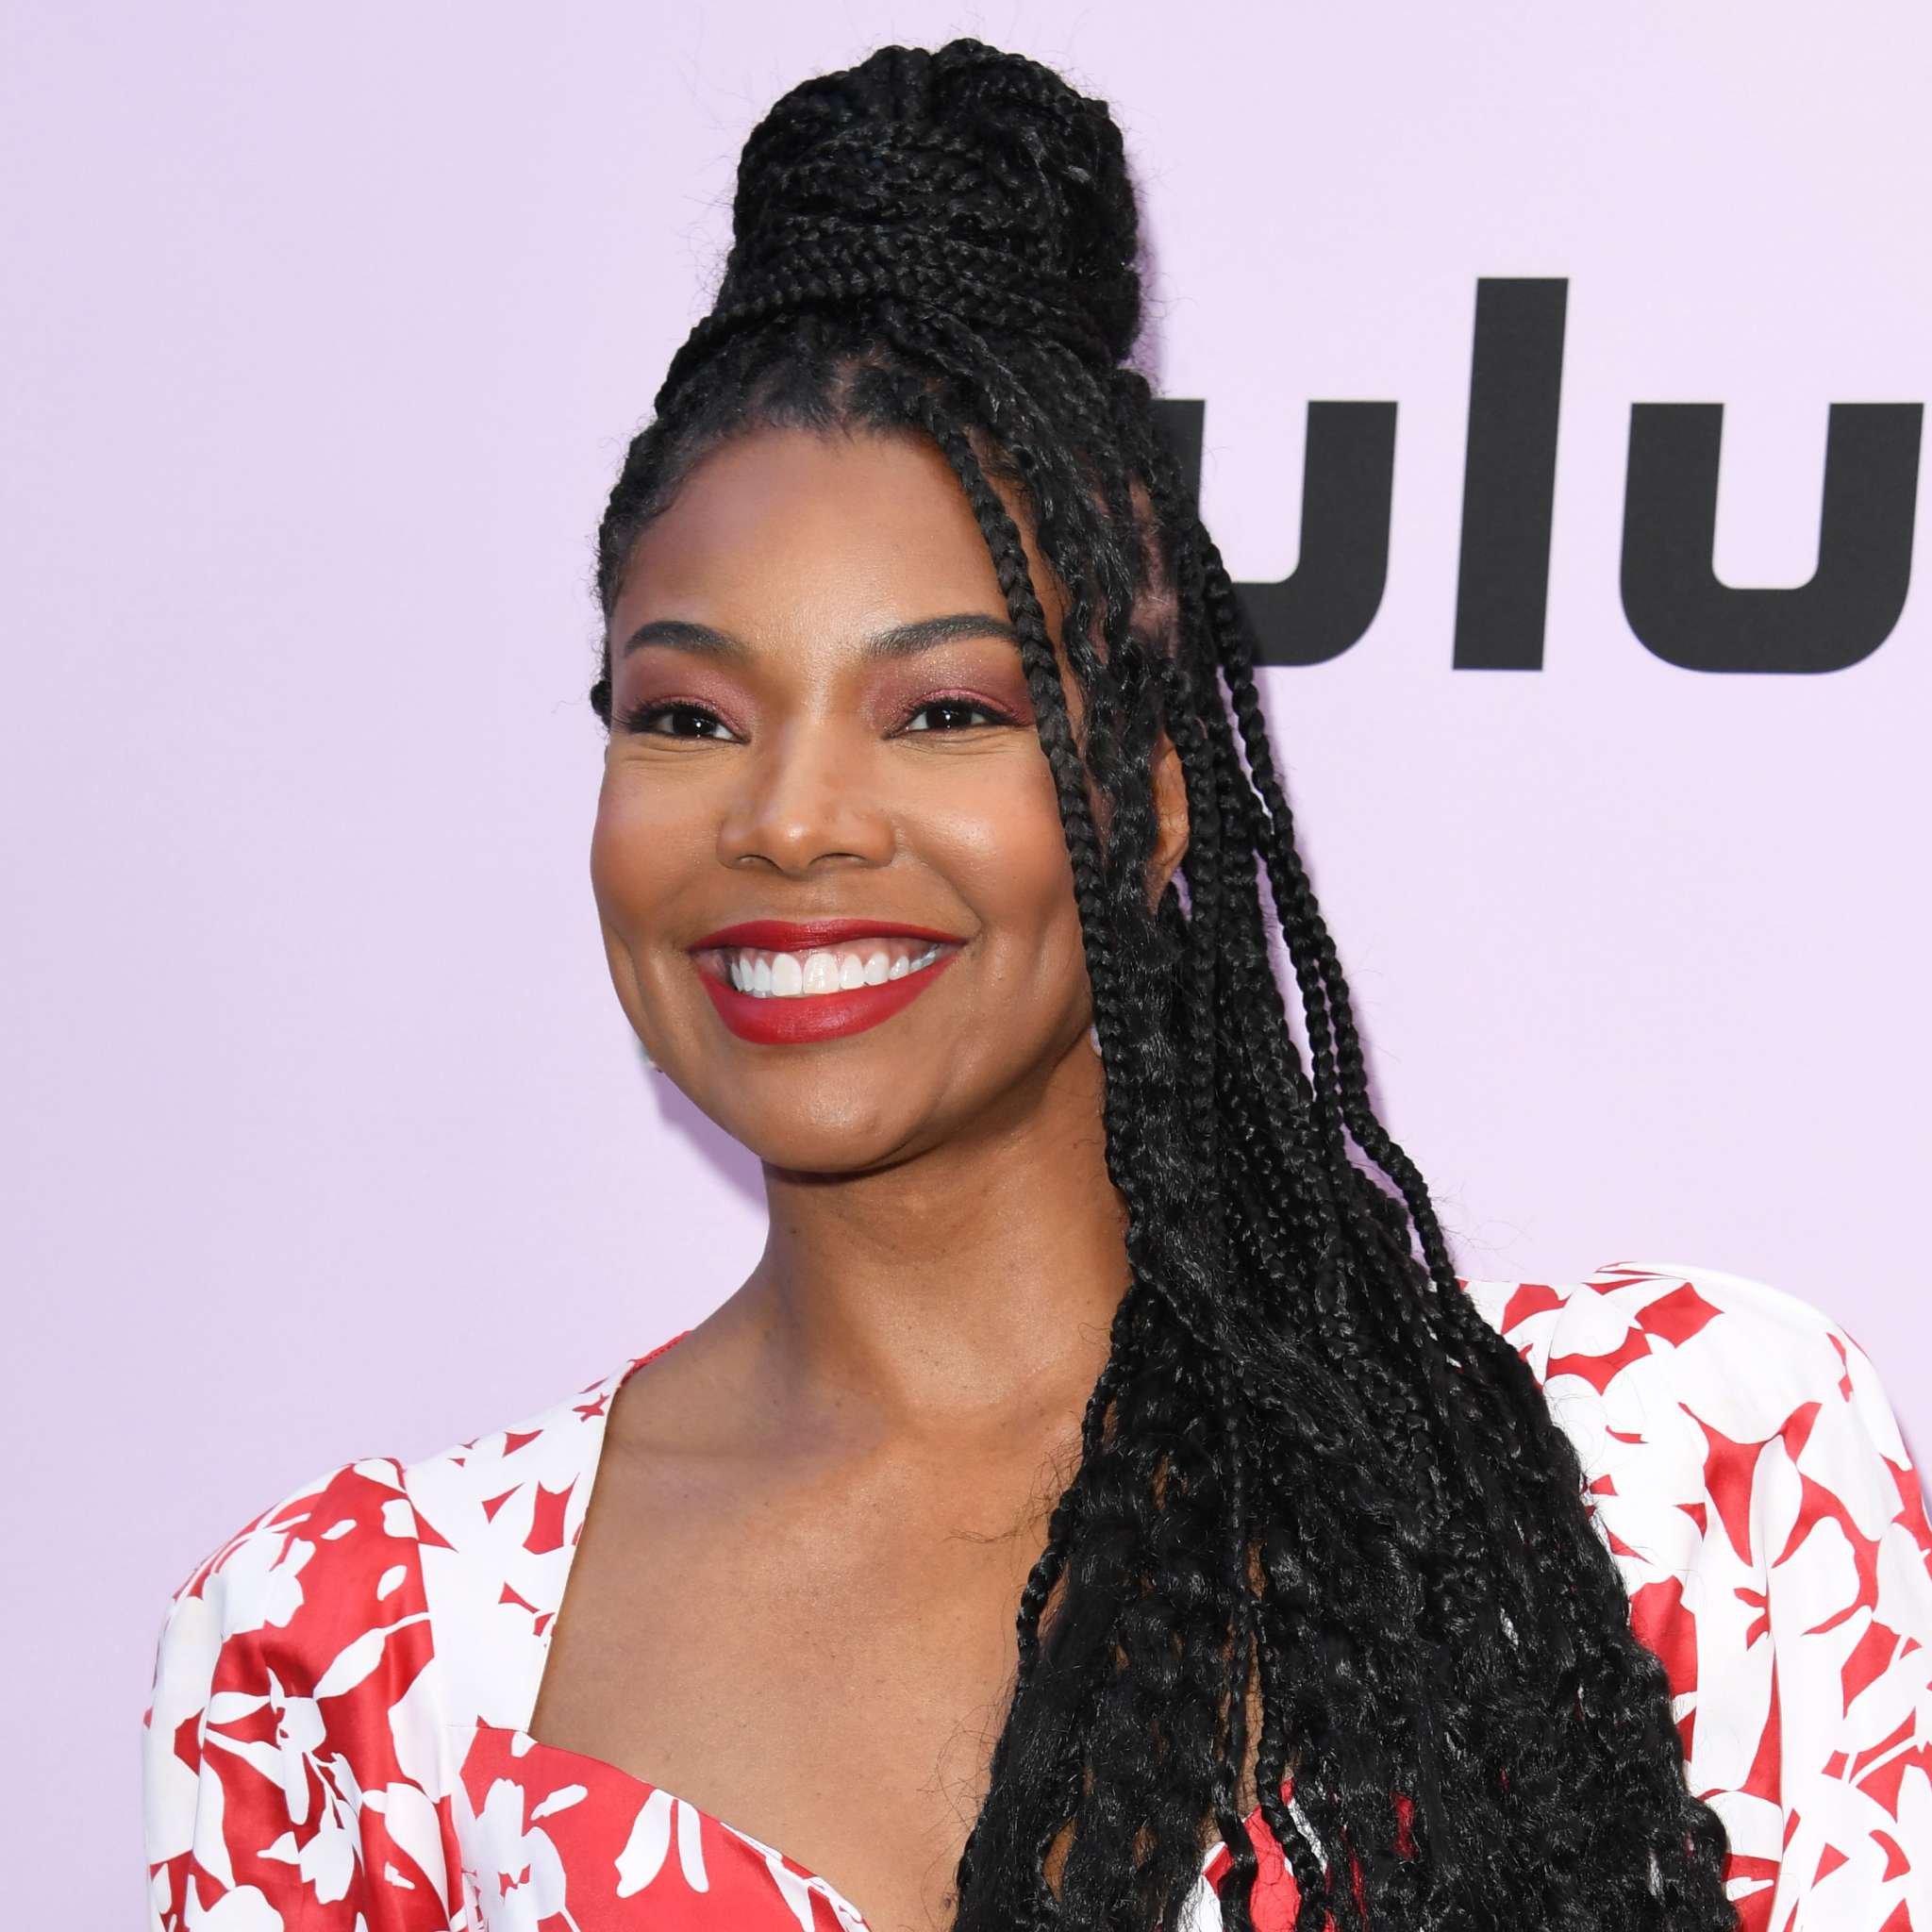 gabrielle-union-shares-emotional-message-for-aliyah-boston